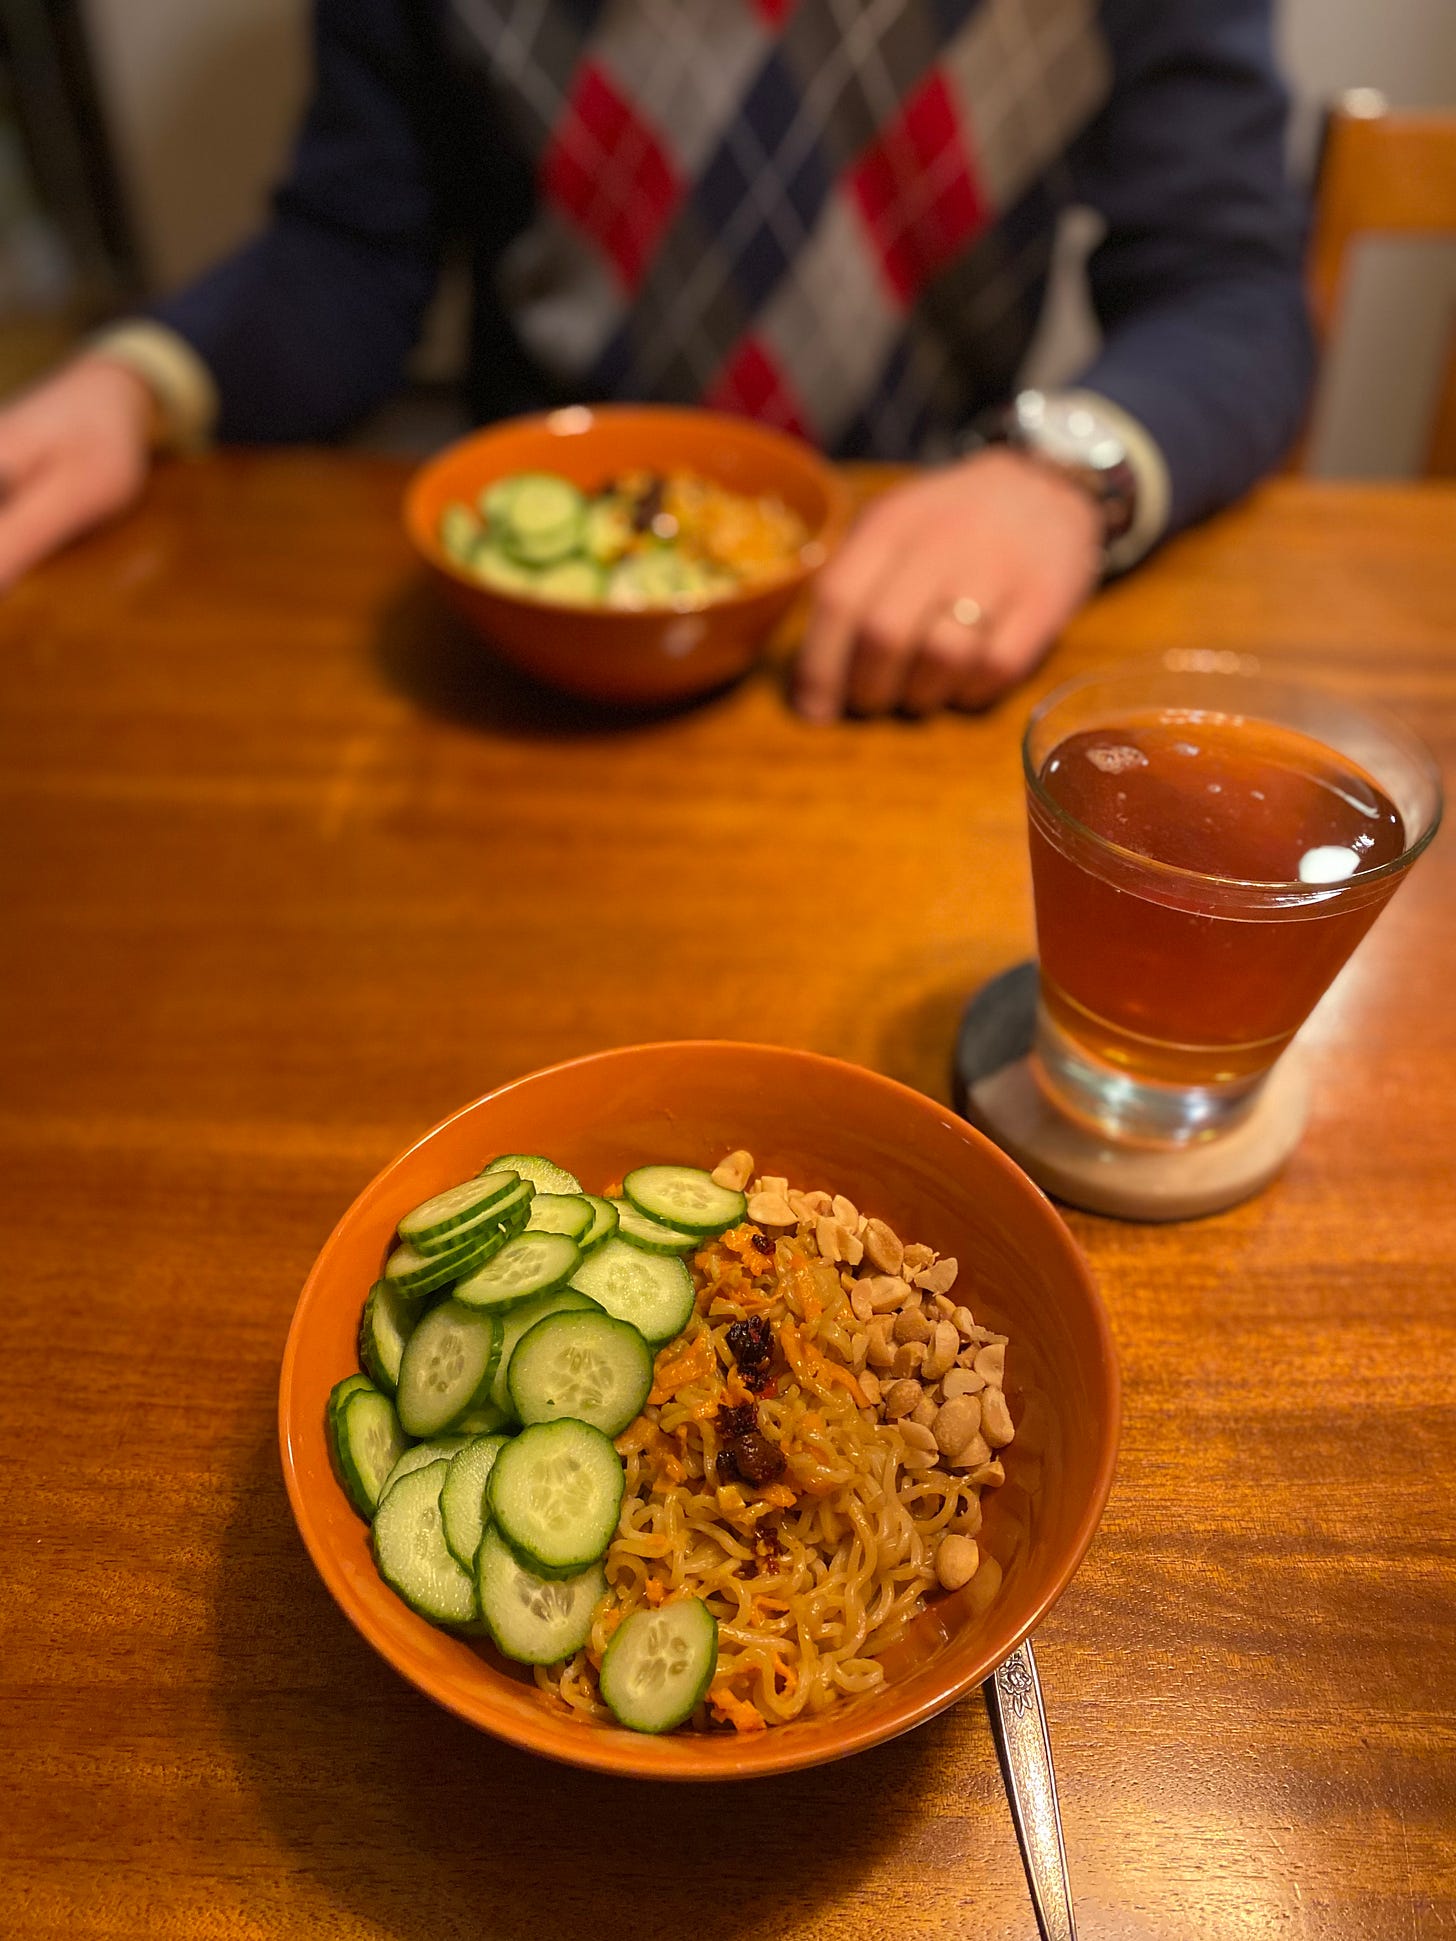 Two orange bowls of the sesame noodles described above, mixed with shredded carrot and topped with cucumber slices, peanuts, and chili crisp. On a coaster is a glass of amber ale. Jeff sits across the table, his hand resting next to his bowl.